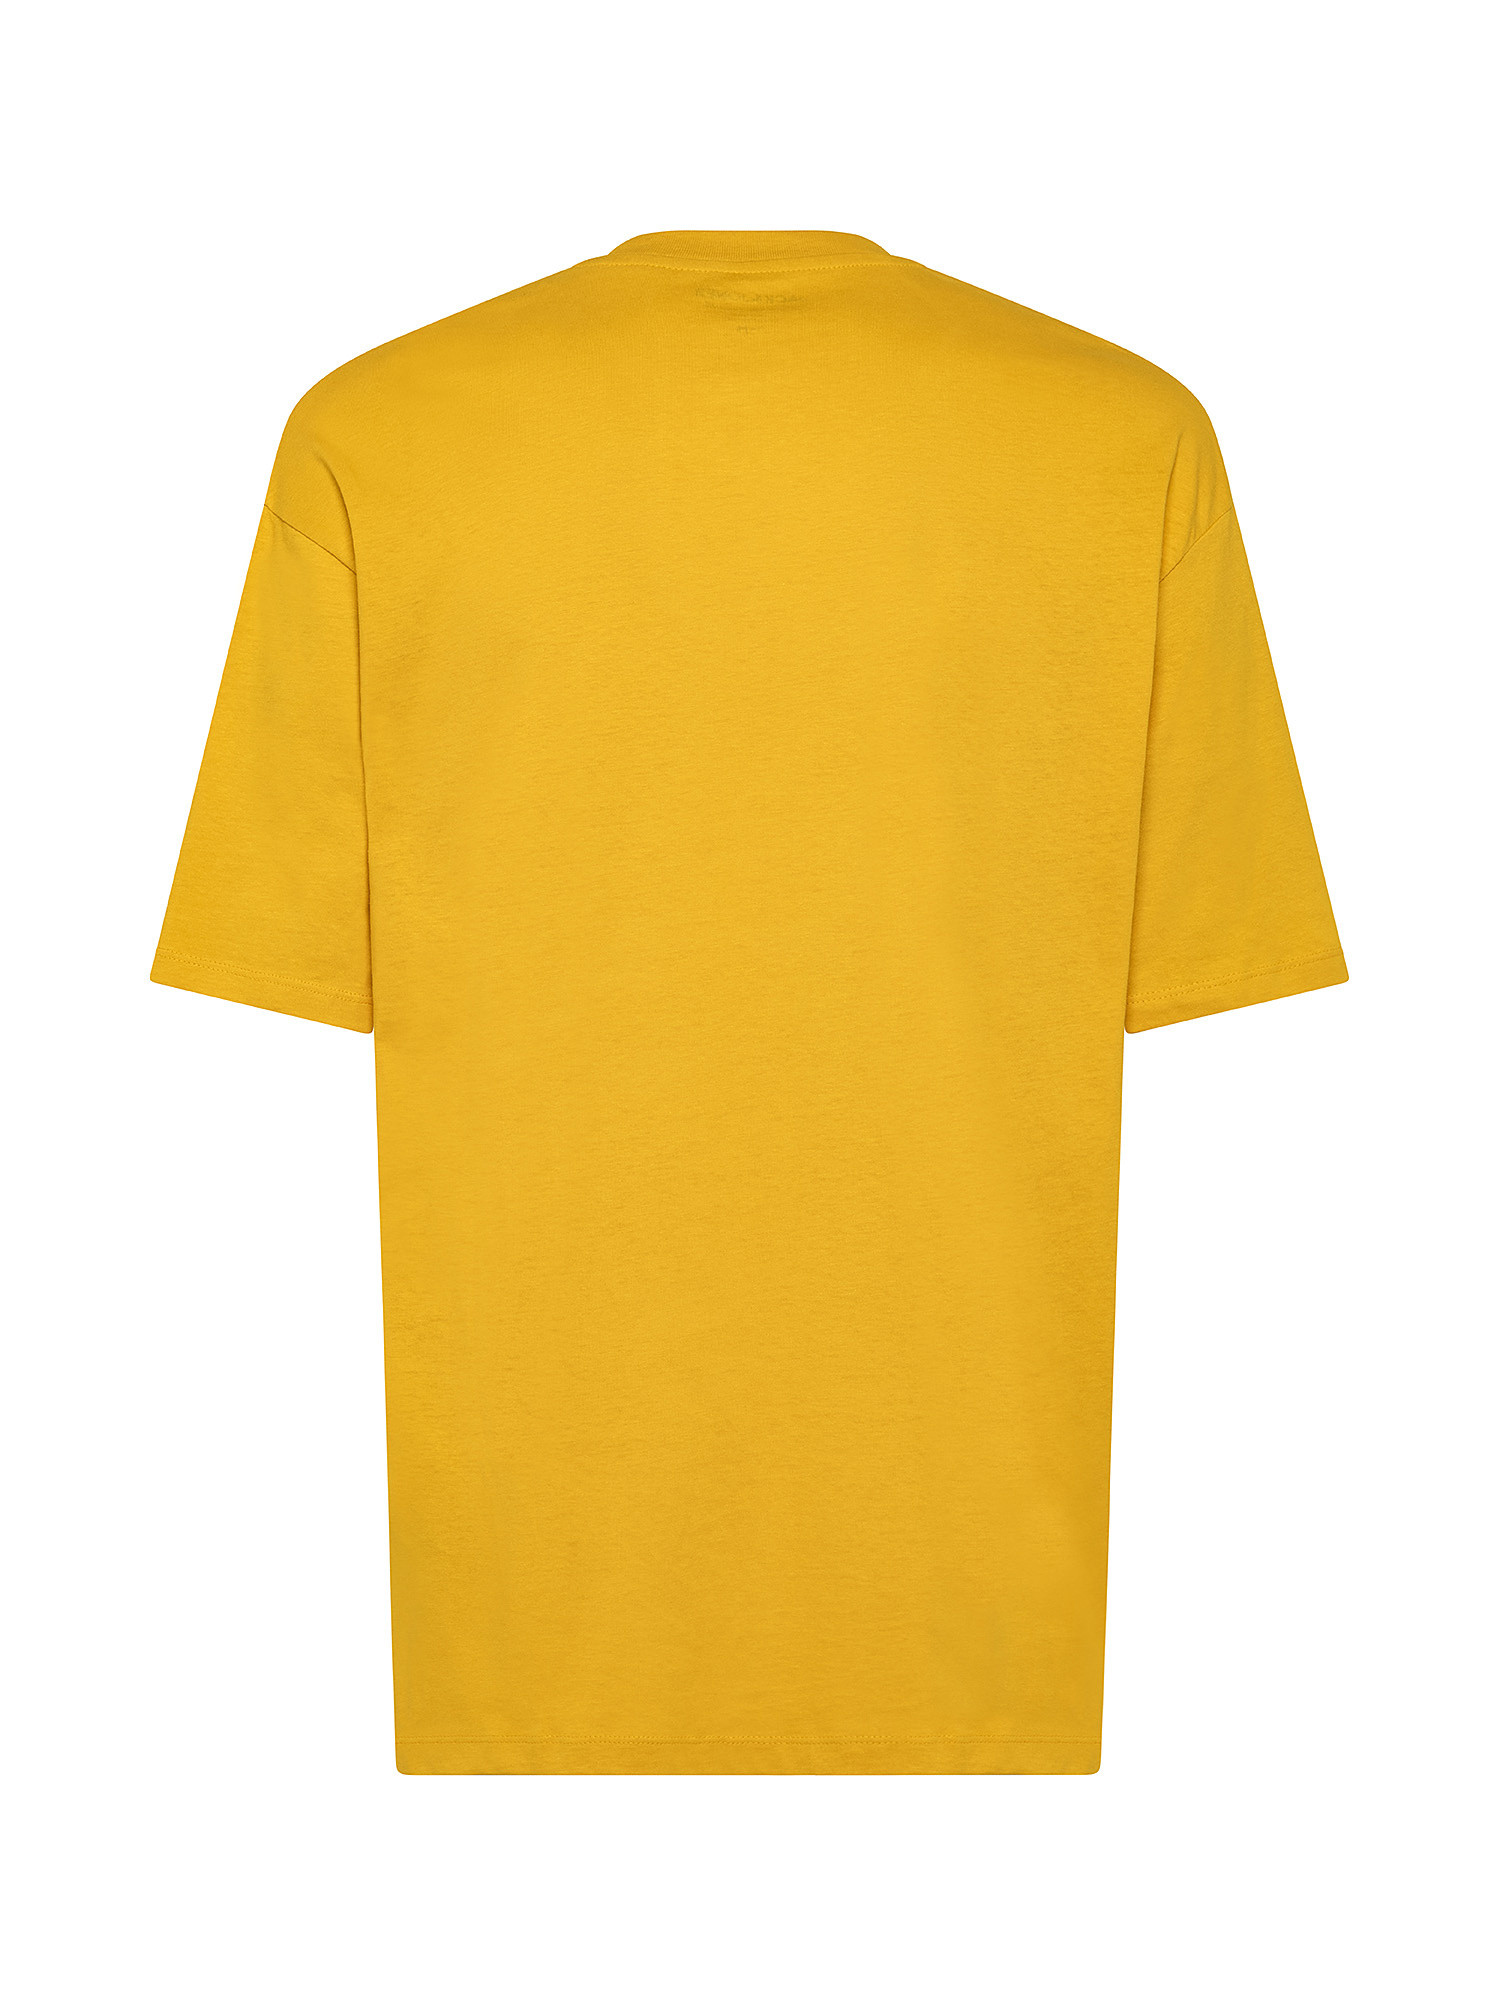 T-shirt in 100% cotton, Yellow, large image number 1